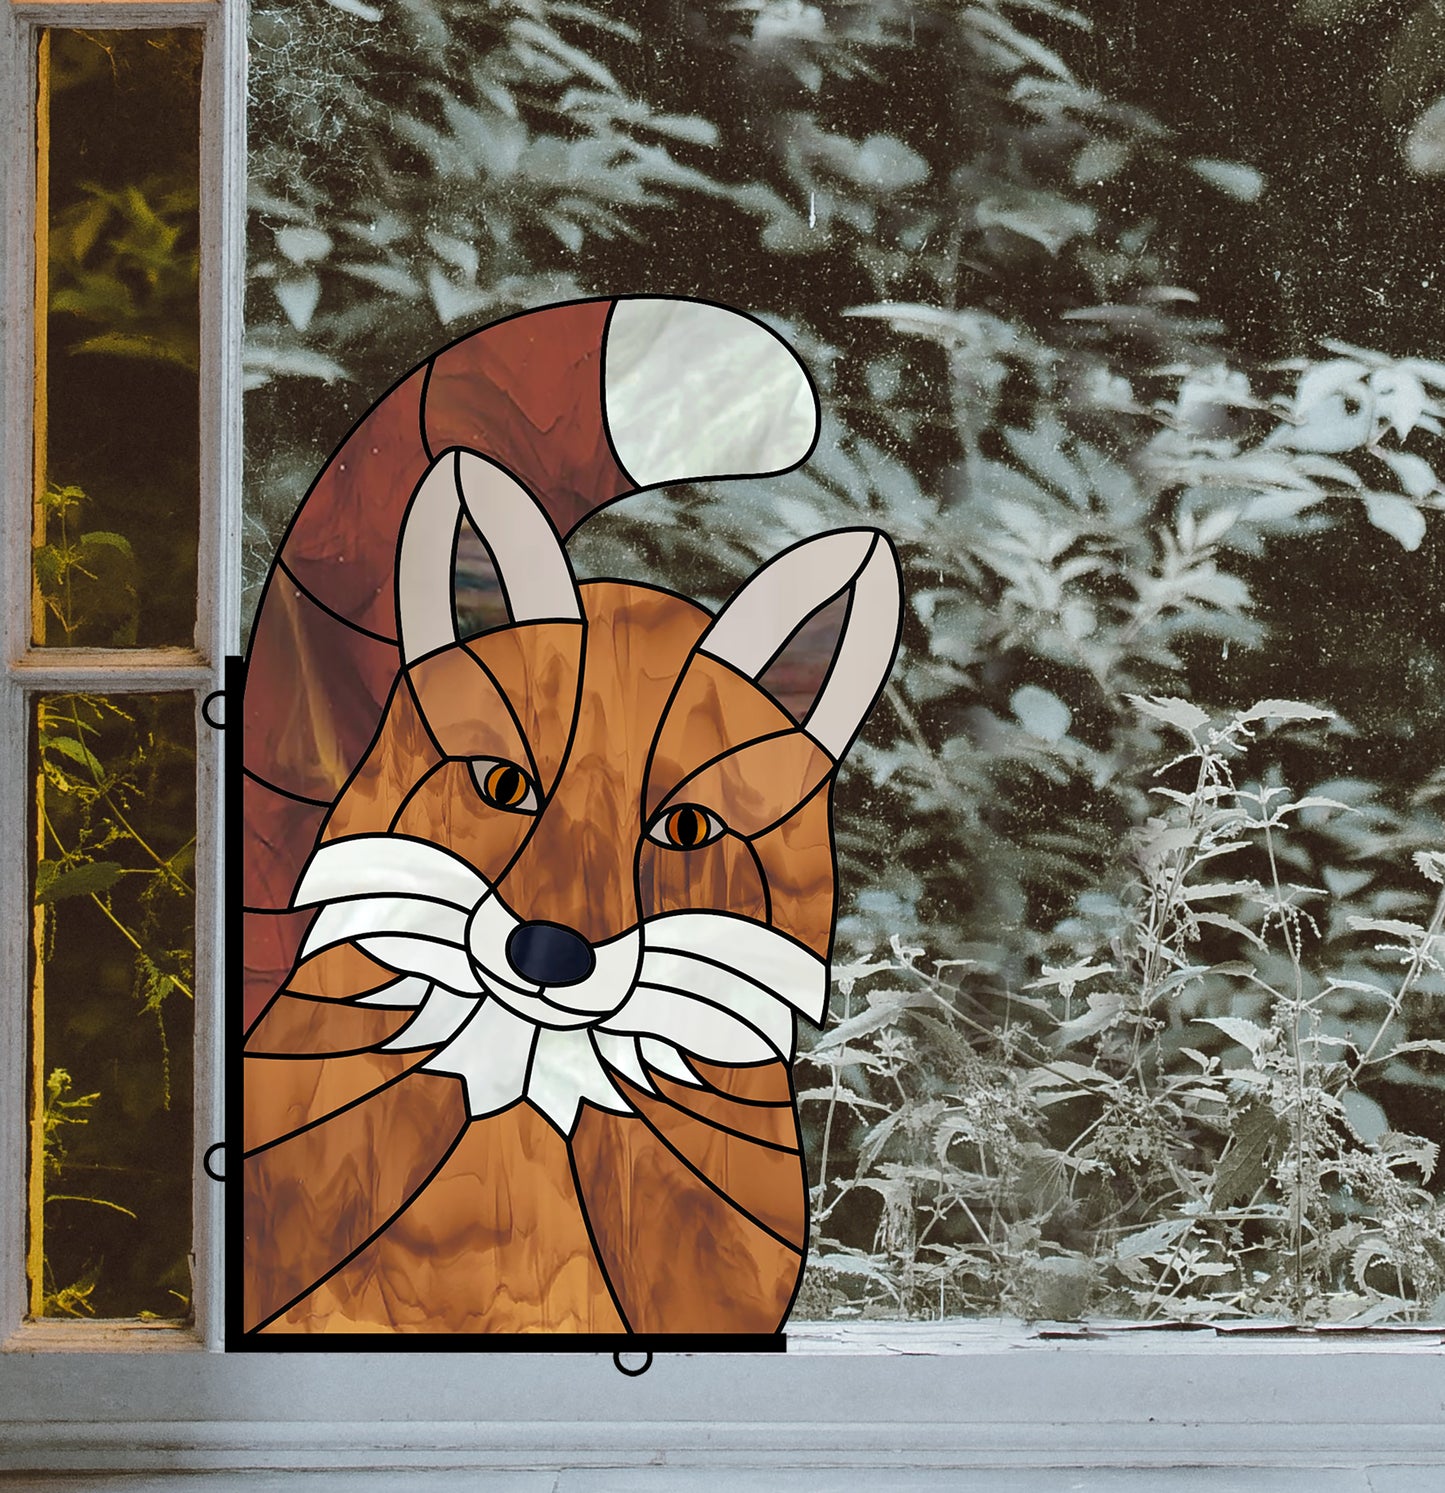 Fox Buddy Stained Glass Pattern